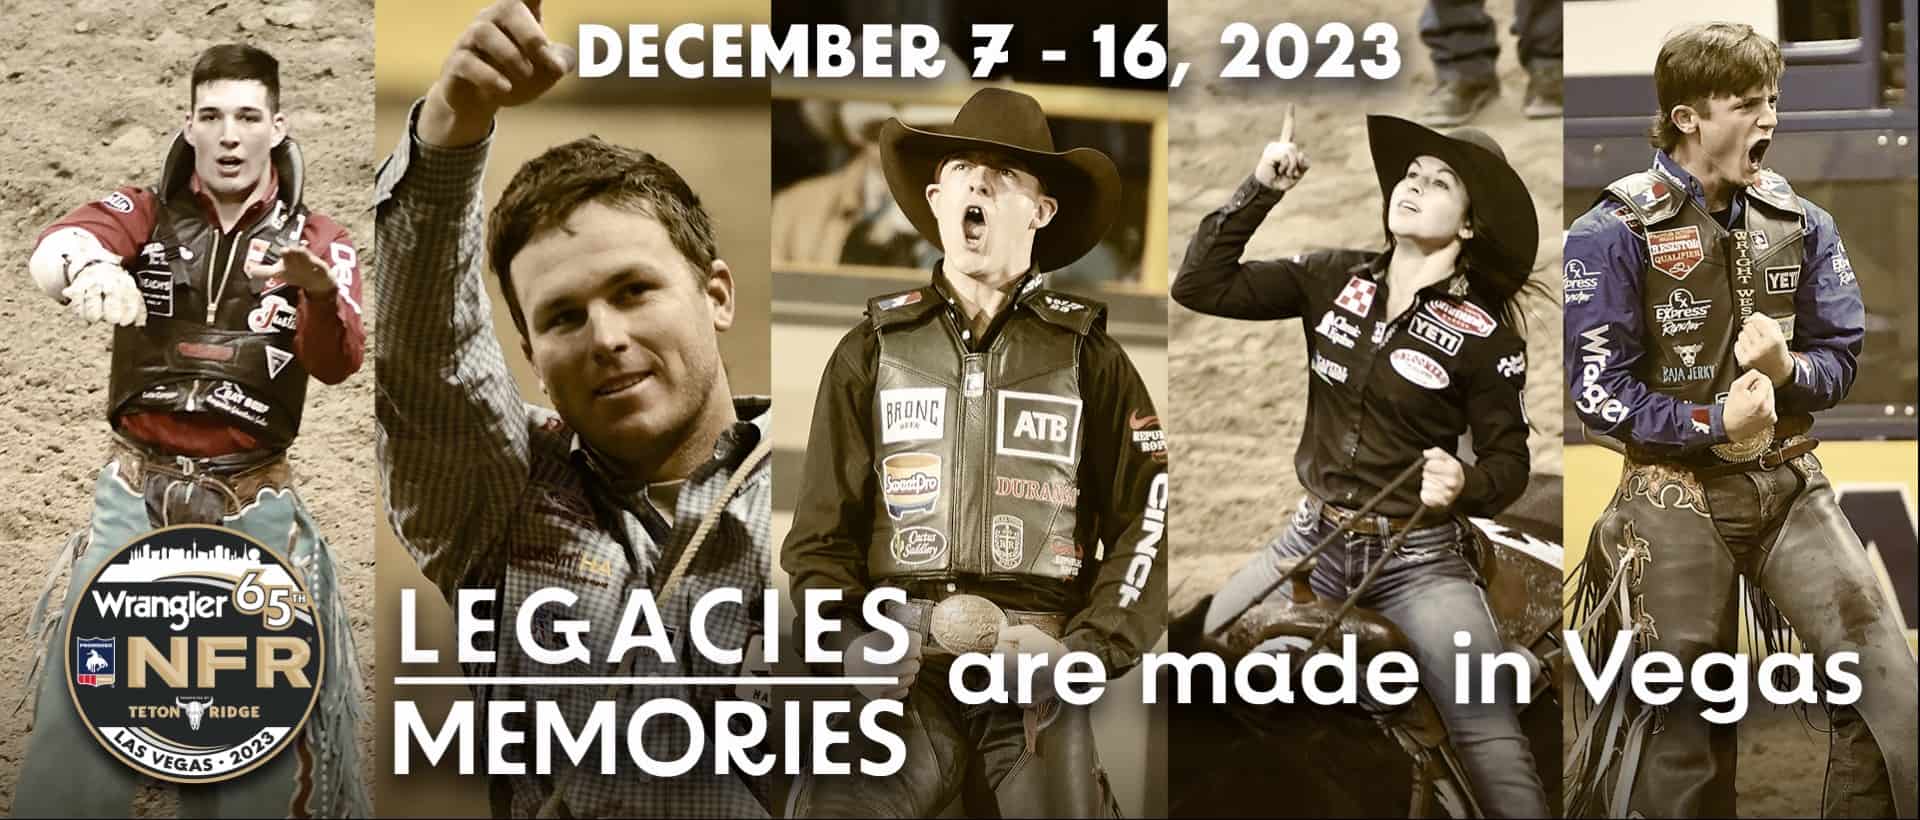 How to Watch the NFR 2023: Live and Streaming